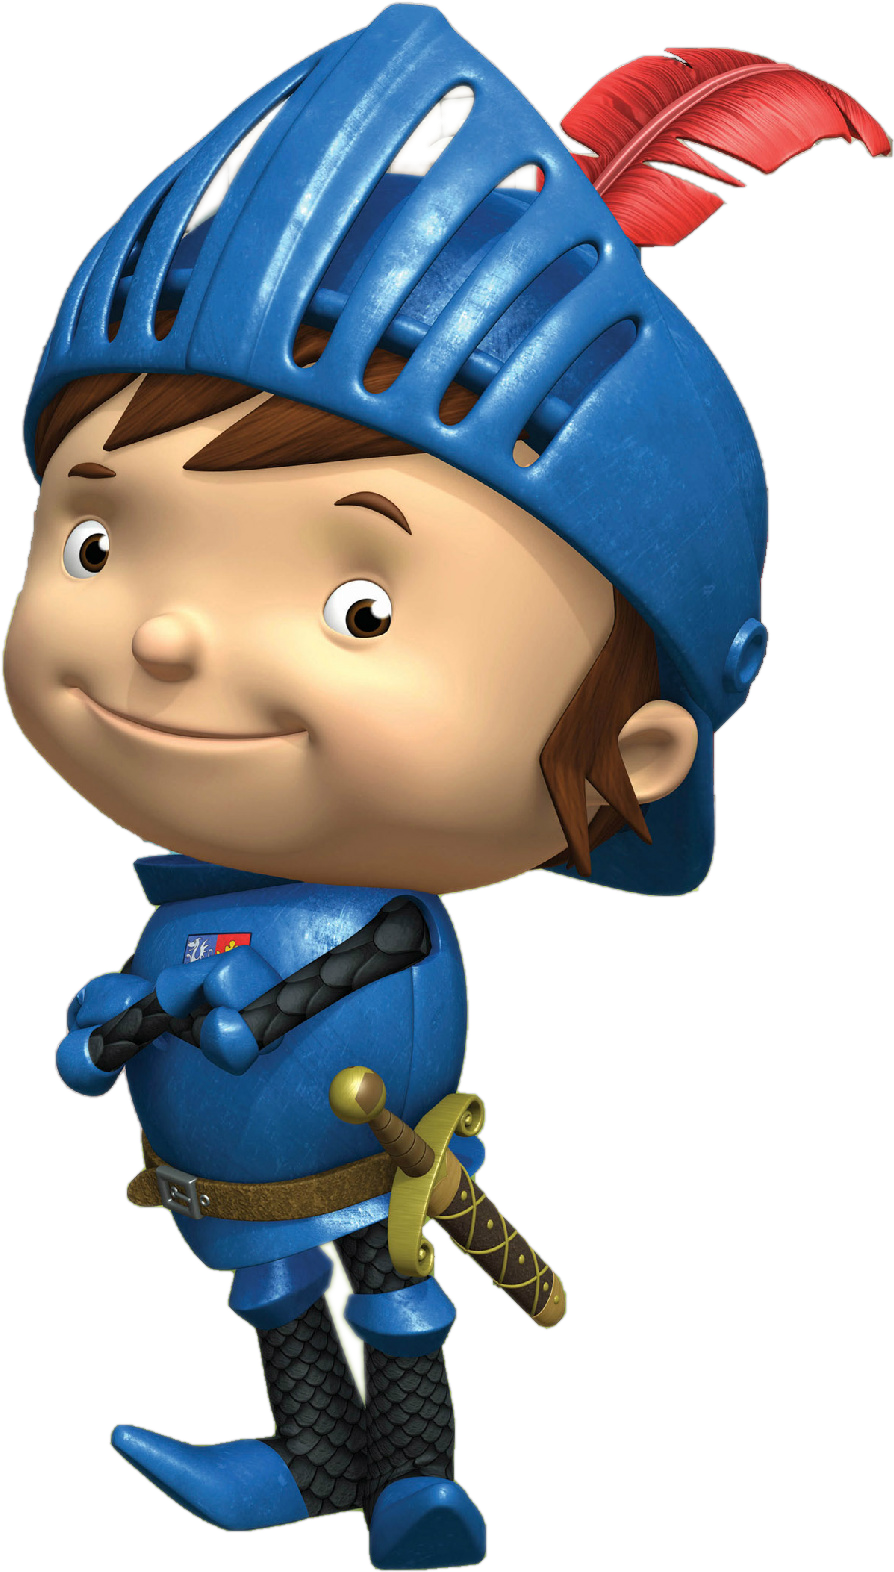 Cartoon Characters: Mike the Knight main characters